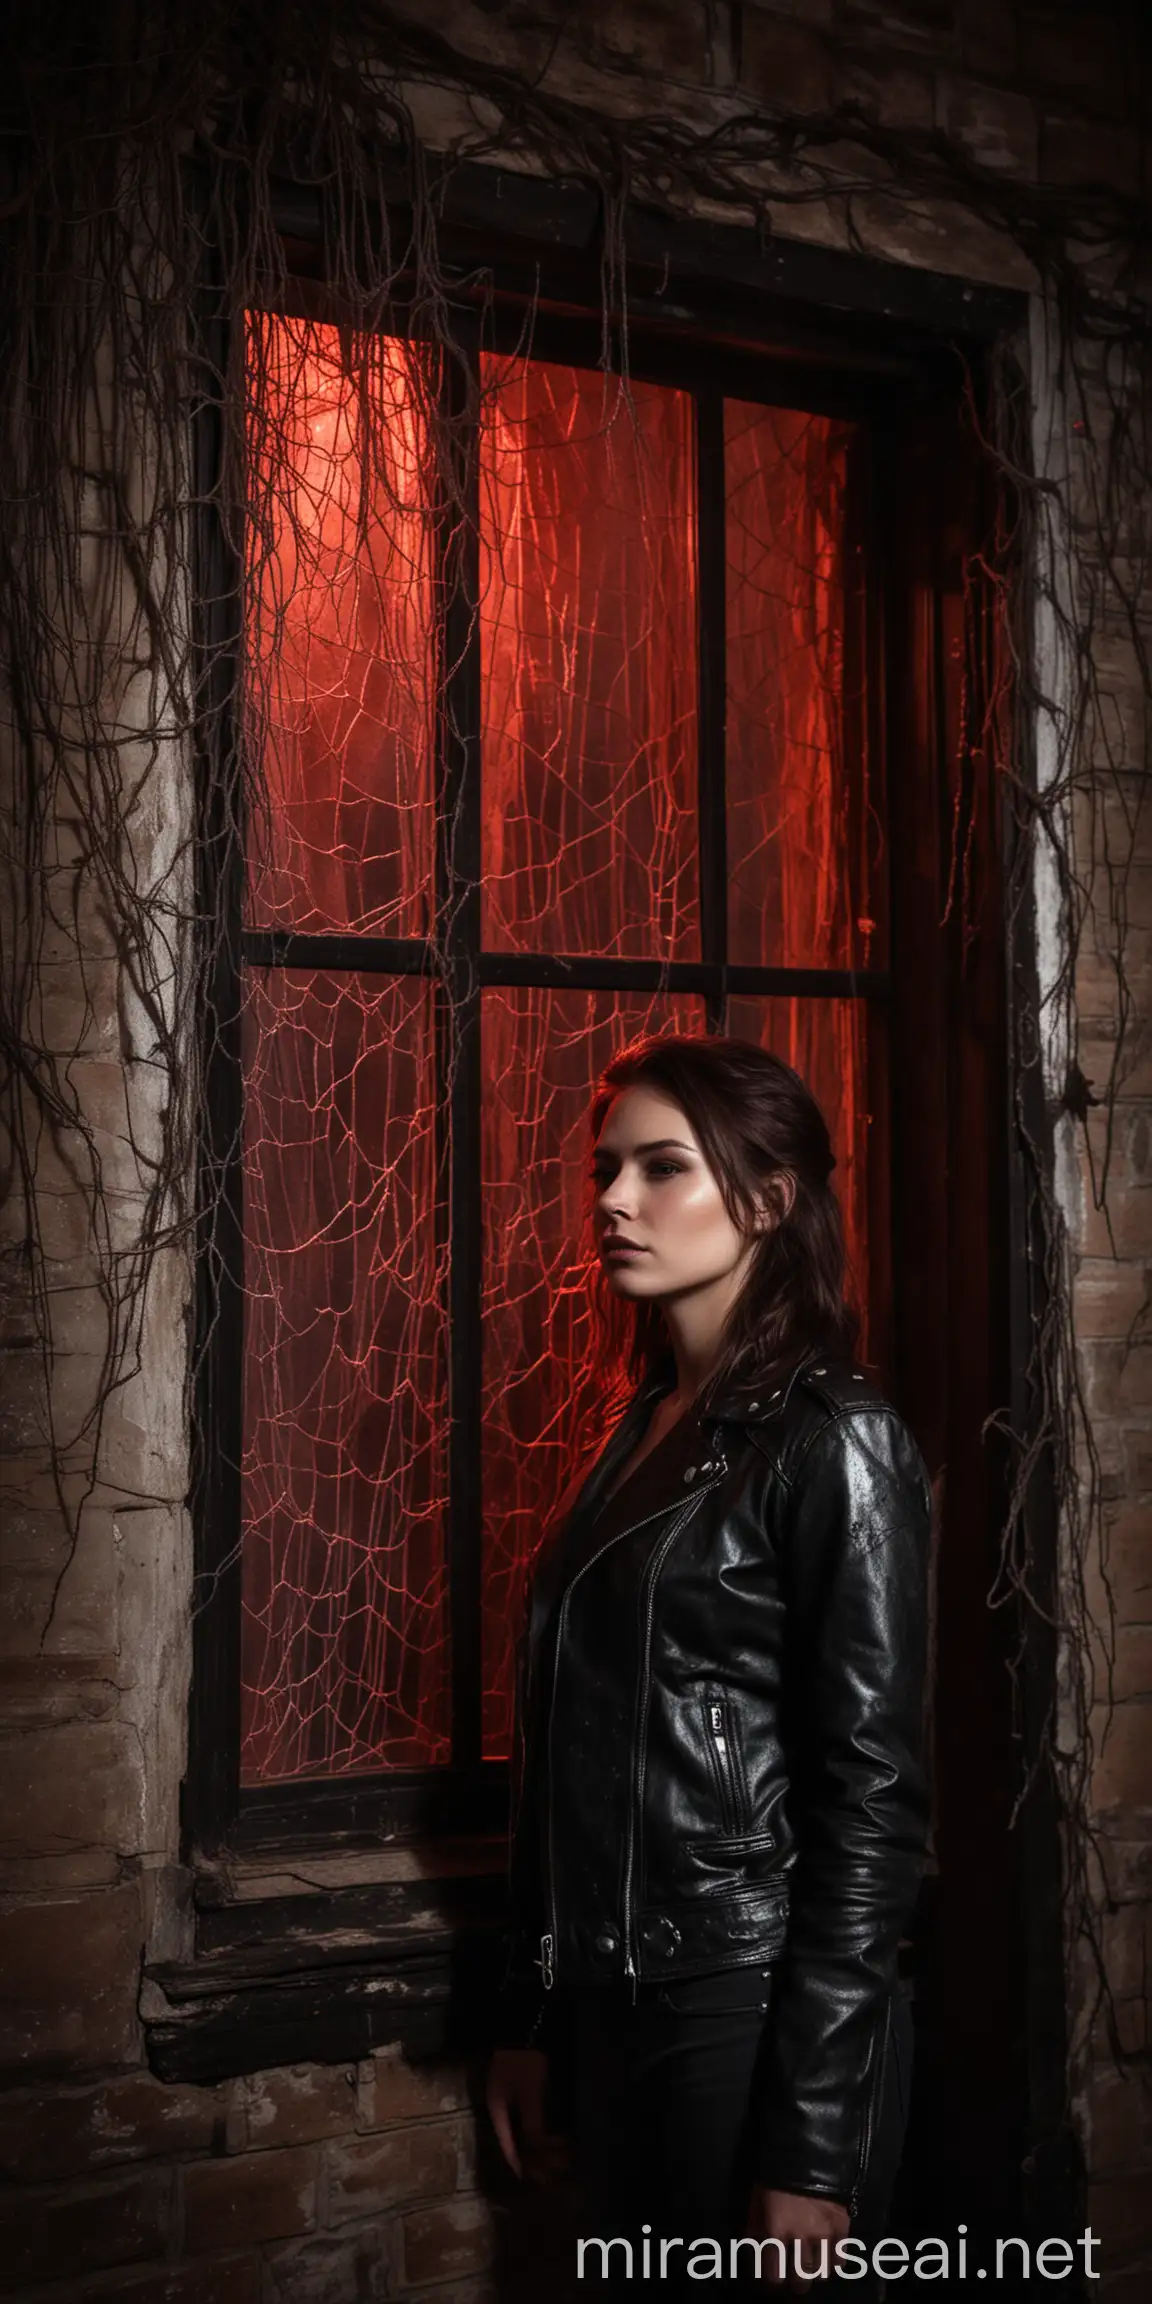 Mysterious Woman in Leather Jacket Gazes from Haunted House with Eerie Glow